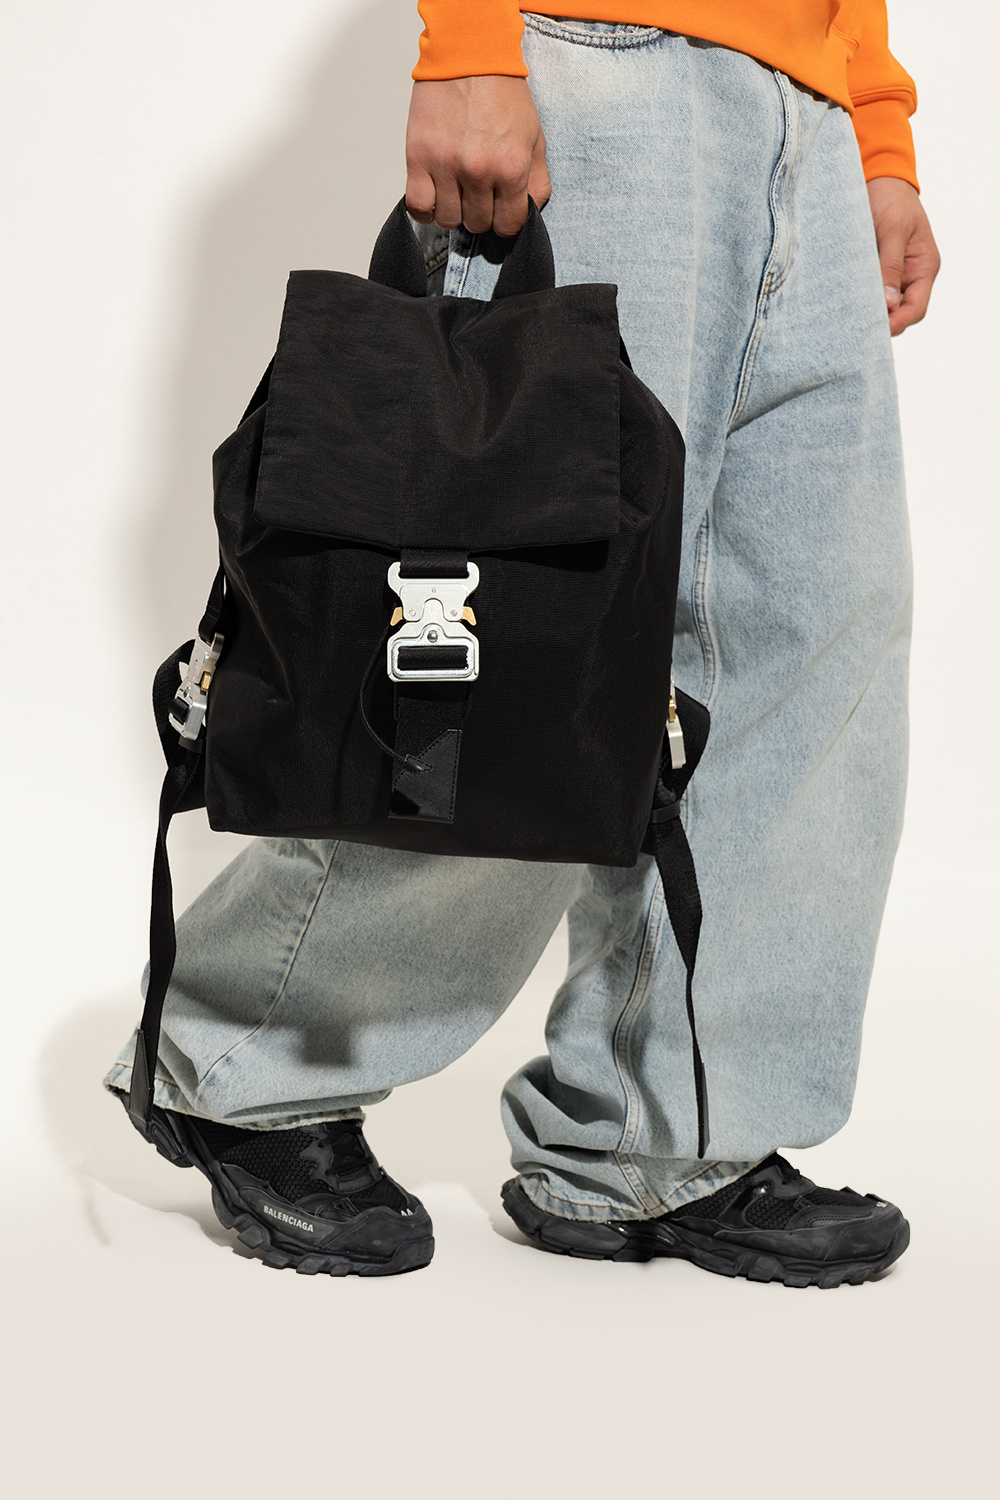 Alyx Tank backpack with roller coaster buckles. #shopsuperstreet